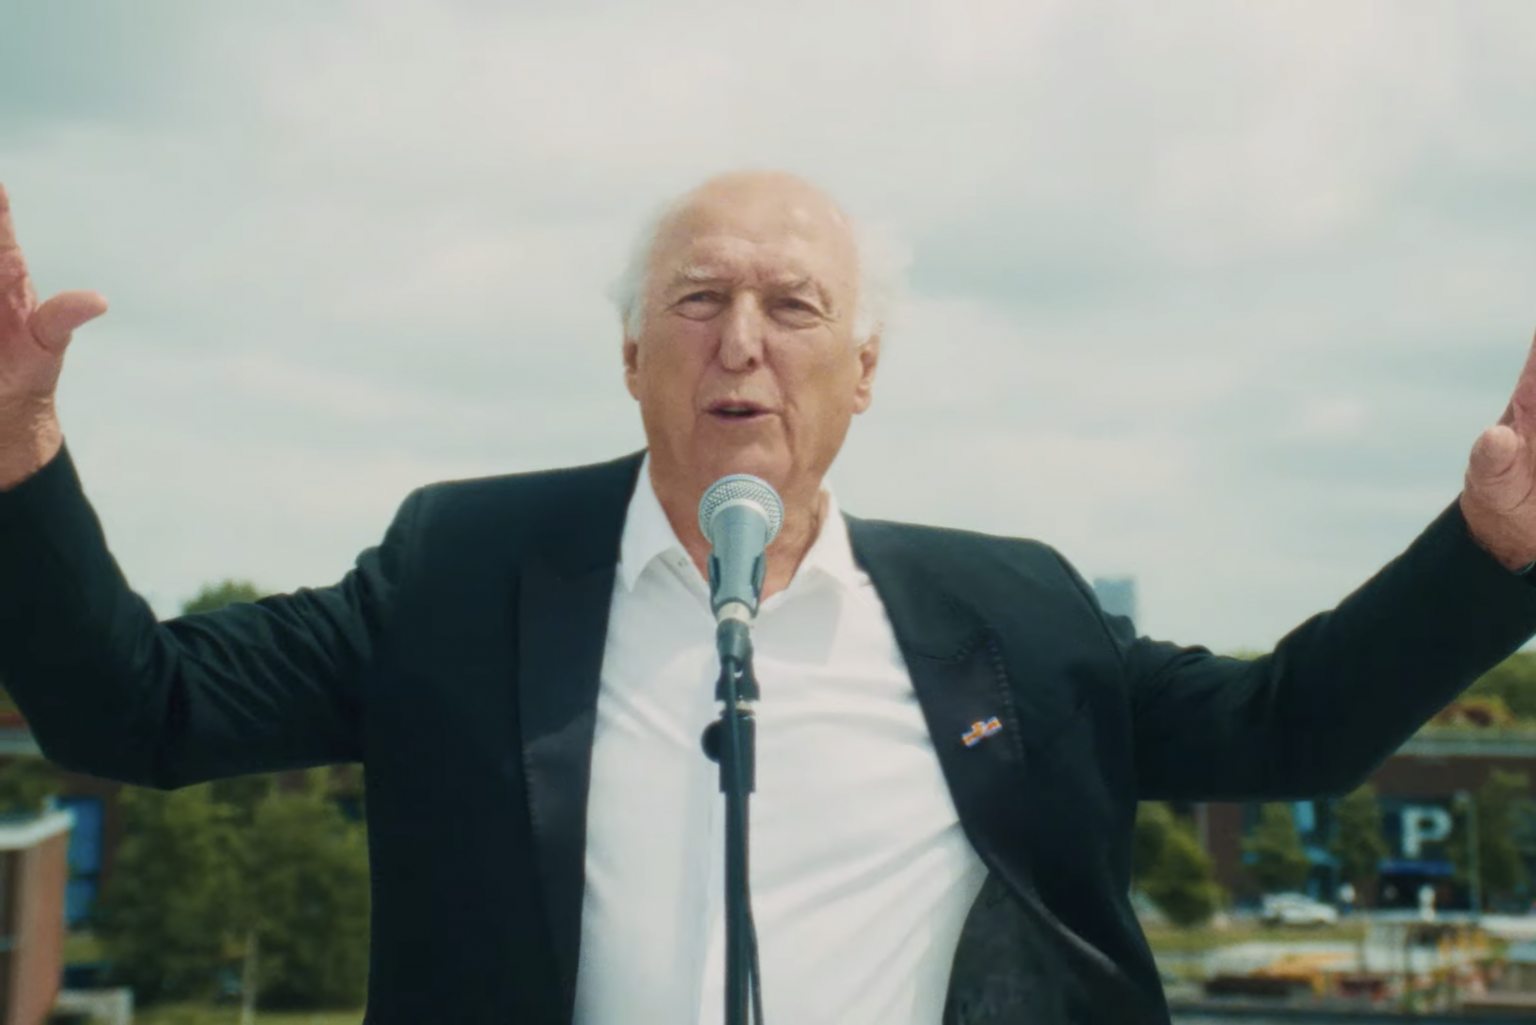 Still from 'Kom Van Dat Gas Af.' Peter Koelewijn, an old white man wearing a white blouse and a black suits jacket, is singing into a microphone in our direction. He has his arms wide open.